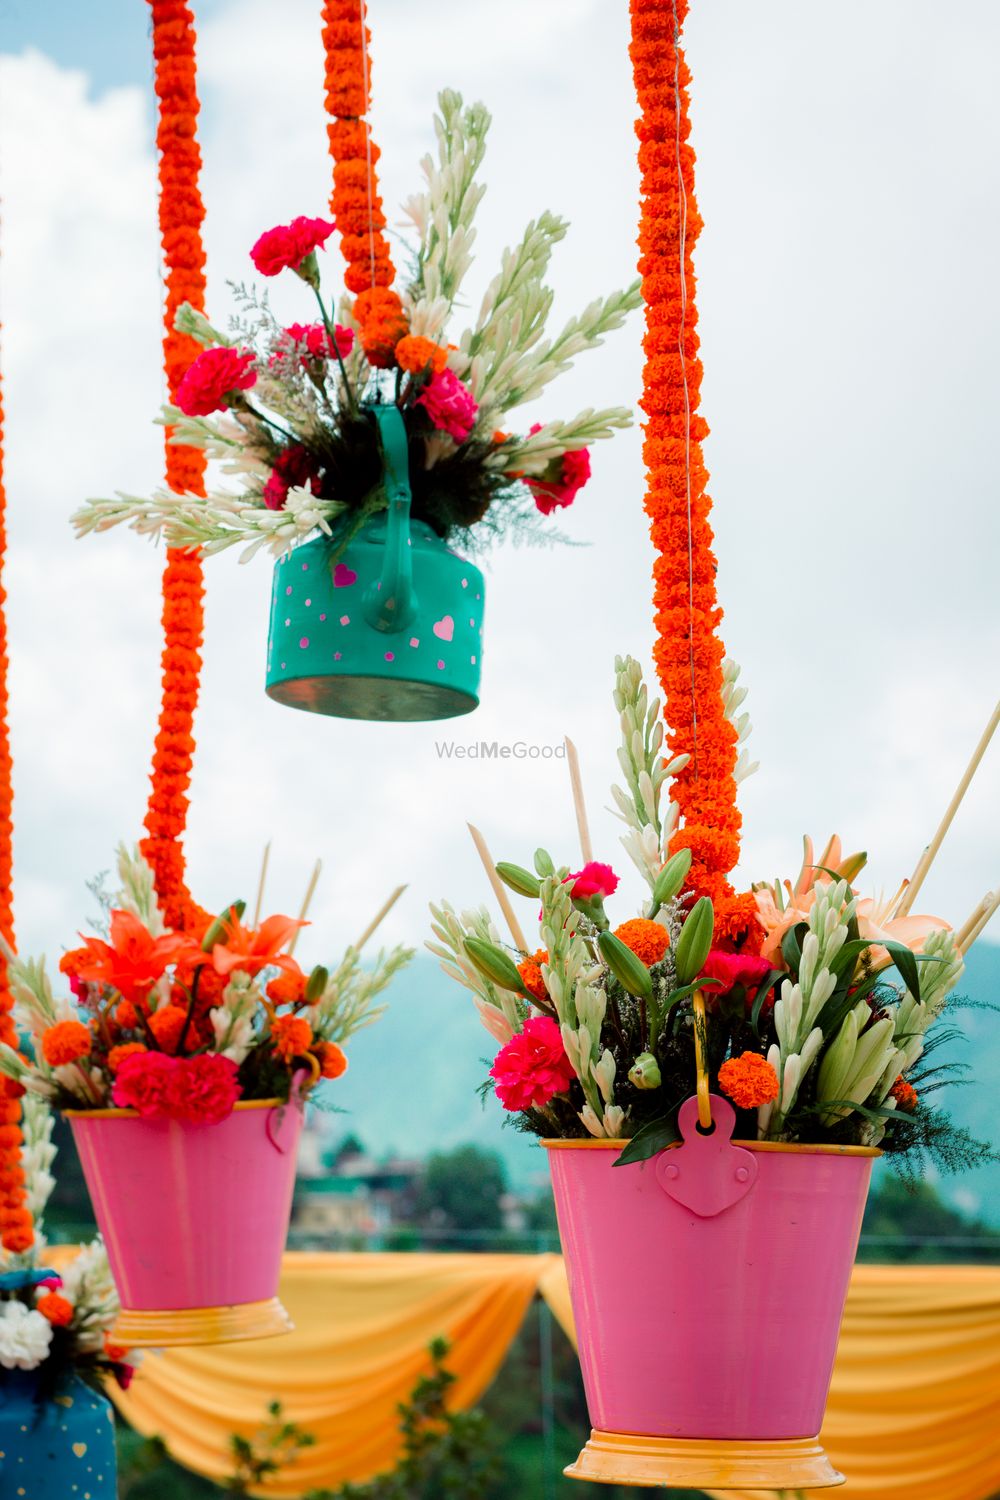 Photo of Pretty hanging kettle with flowers for mehendi